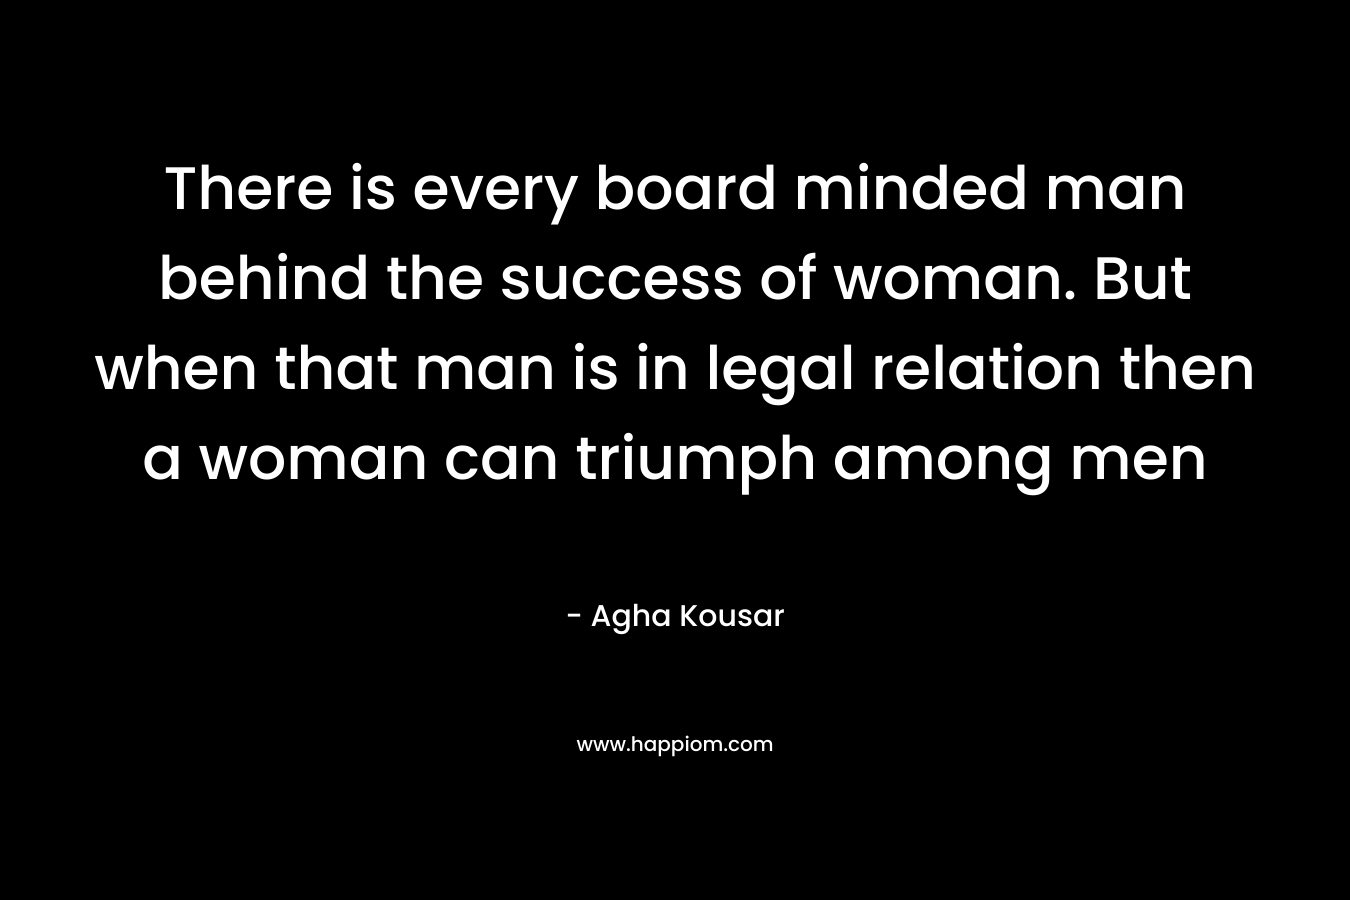 There is every board minded man behind the success of woman. But when that man is in legal relation then a woman can triumph among men – Agha Kousar